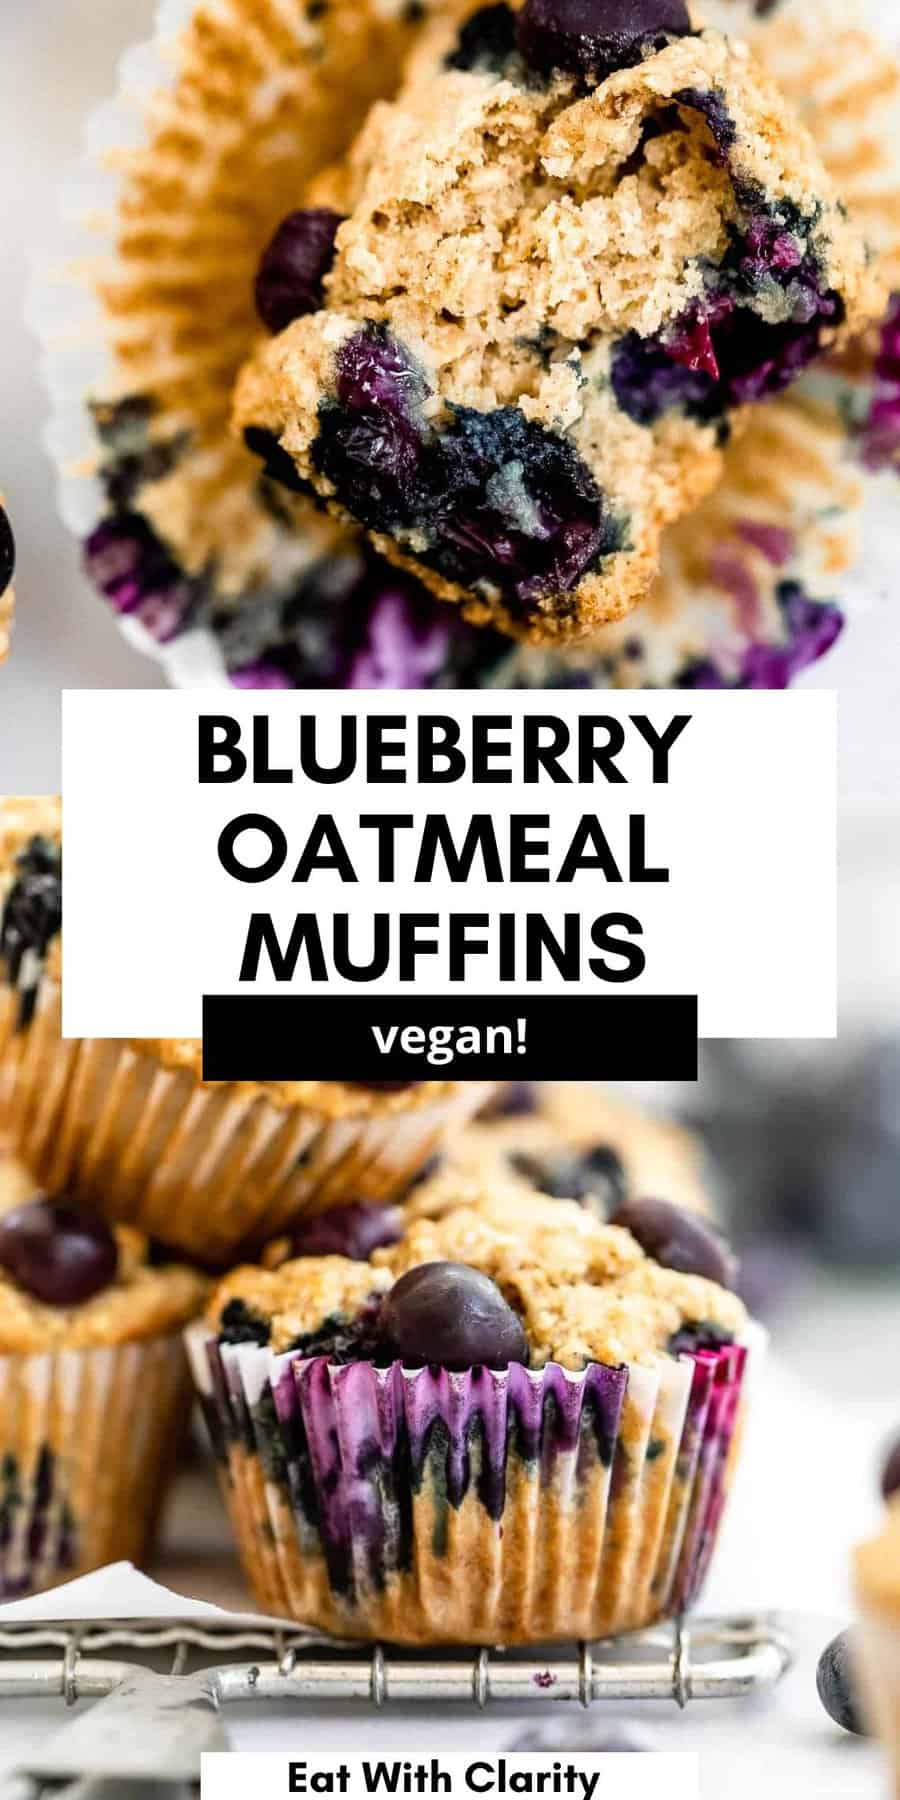 Vegan Blueberry Oatmeal Muffins - Eat With Clarity